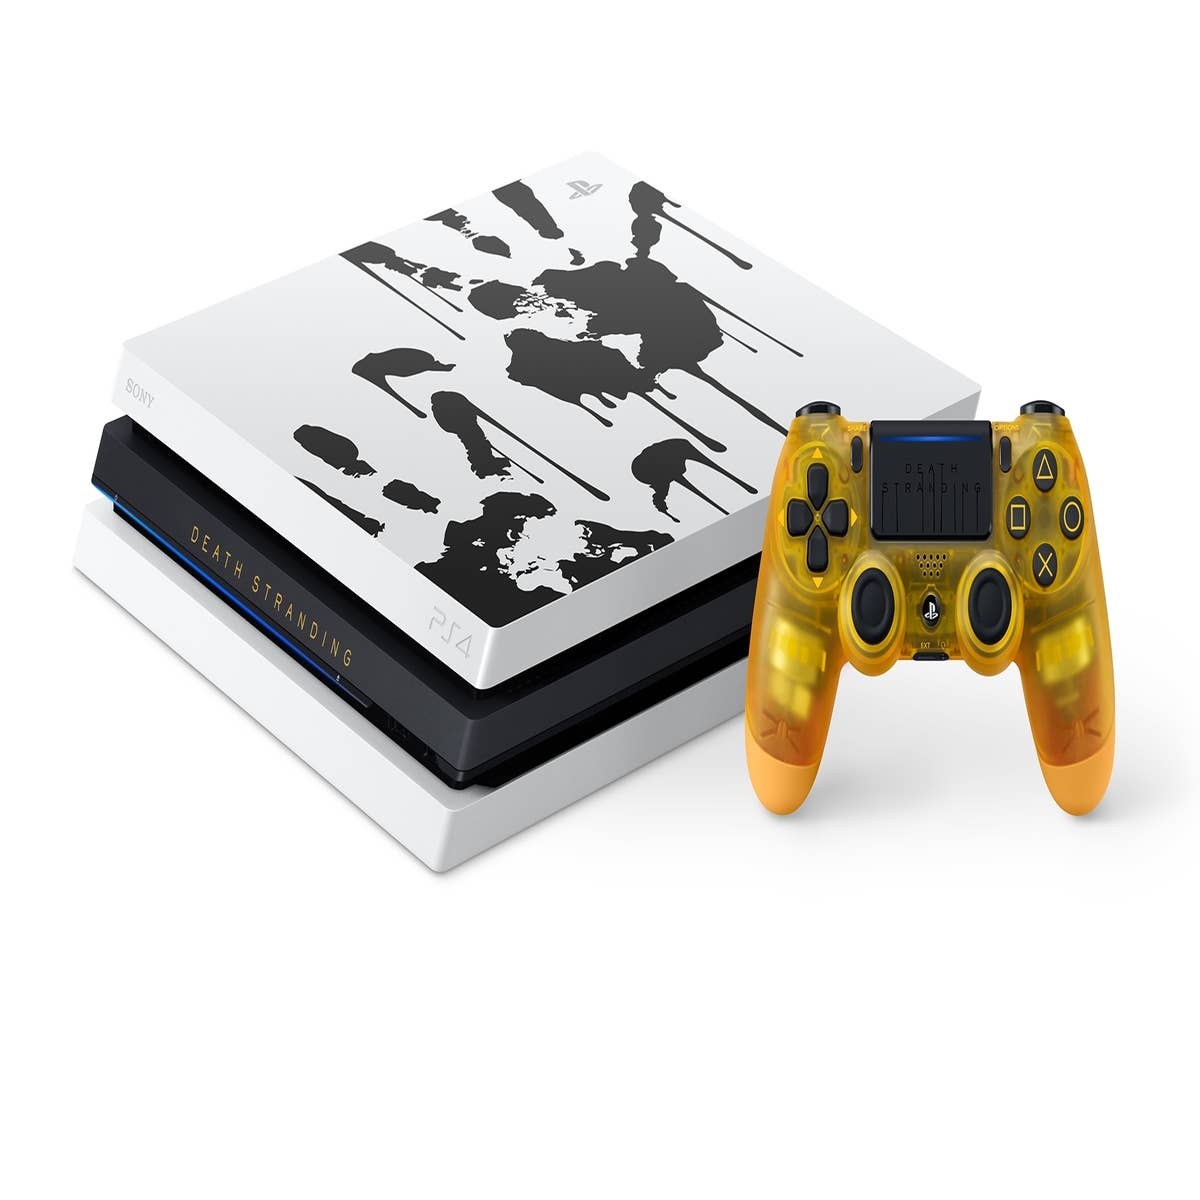 Eurogamer Q&A: Win a limited edition Death Stranding PS4 Pro